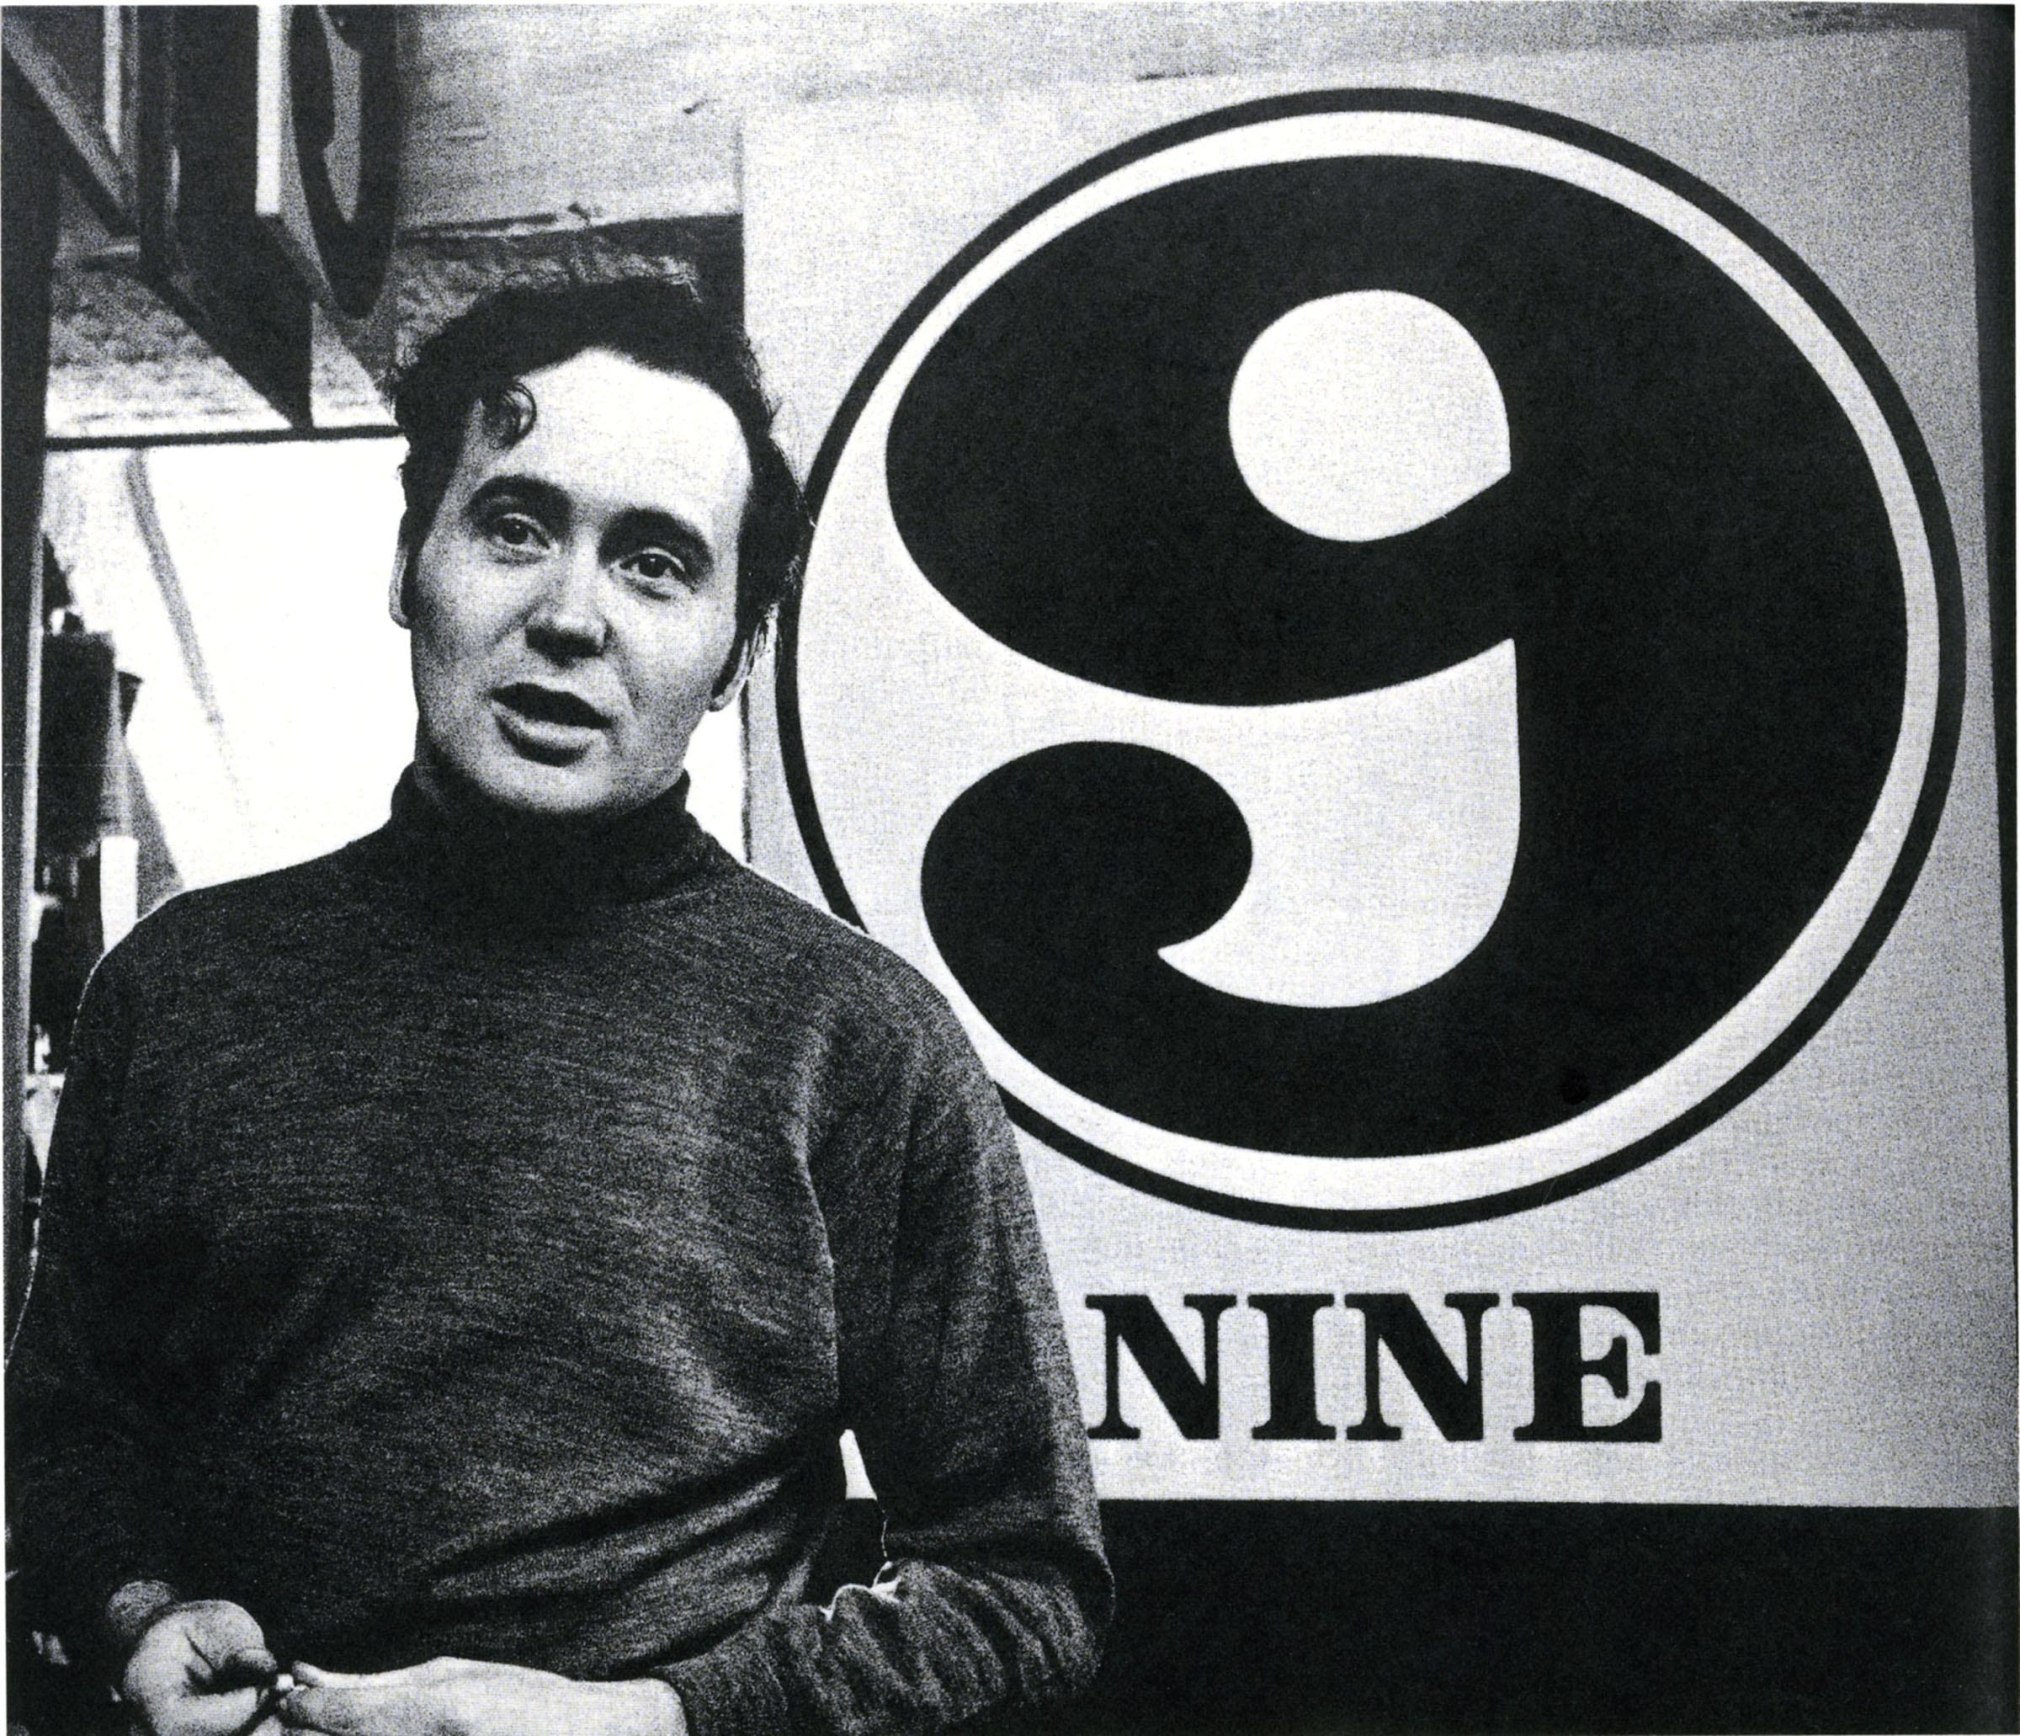 Robert Indiana in his studio with Nine (1965). Photo: Hans Namuth,&nbsp;Hans Namuth Archive, Center for Creative Photography &copy; 1991 Hans Namuth Estate